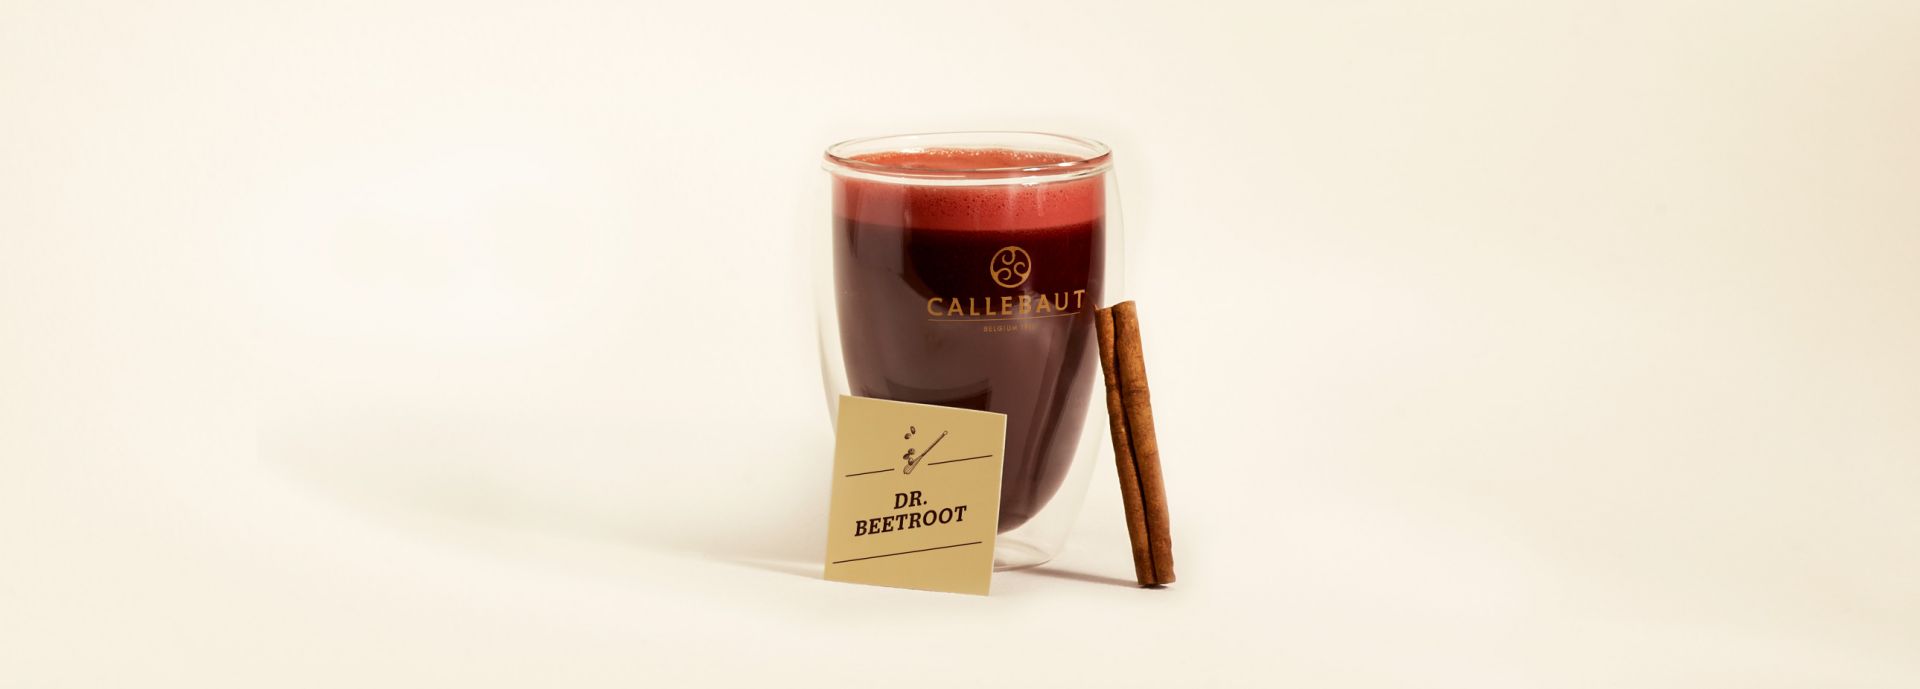 Hot Chocolate Dr. beetroot